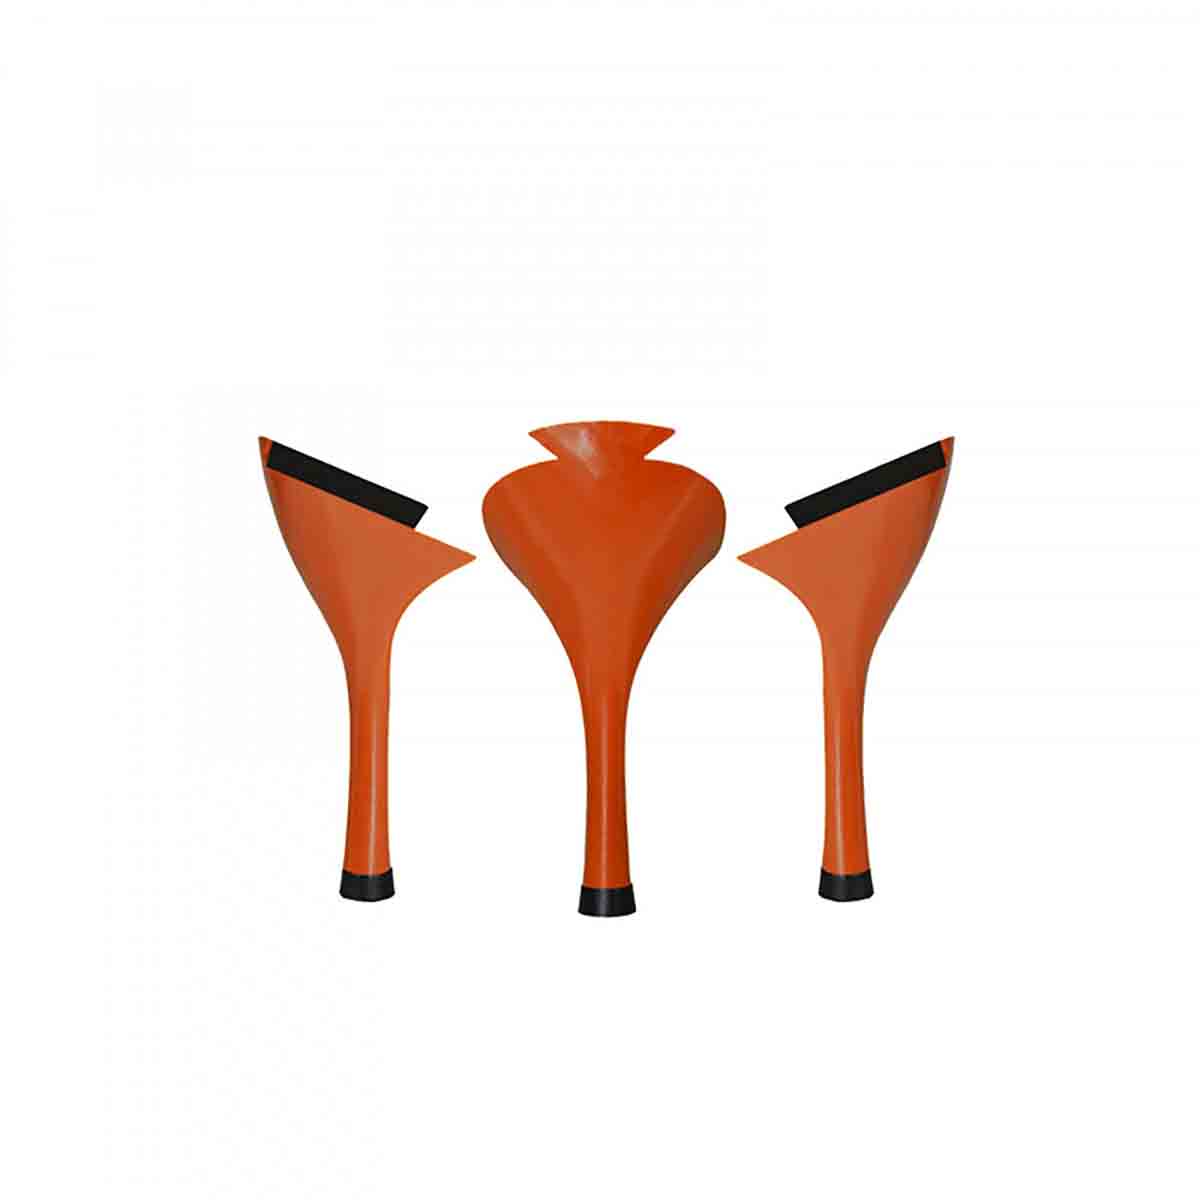 Francois 3.3" Stiletto for Shoe Sizes 9 or Greater